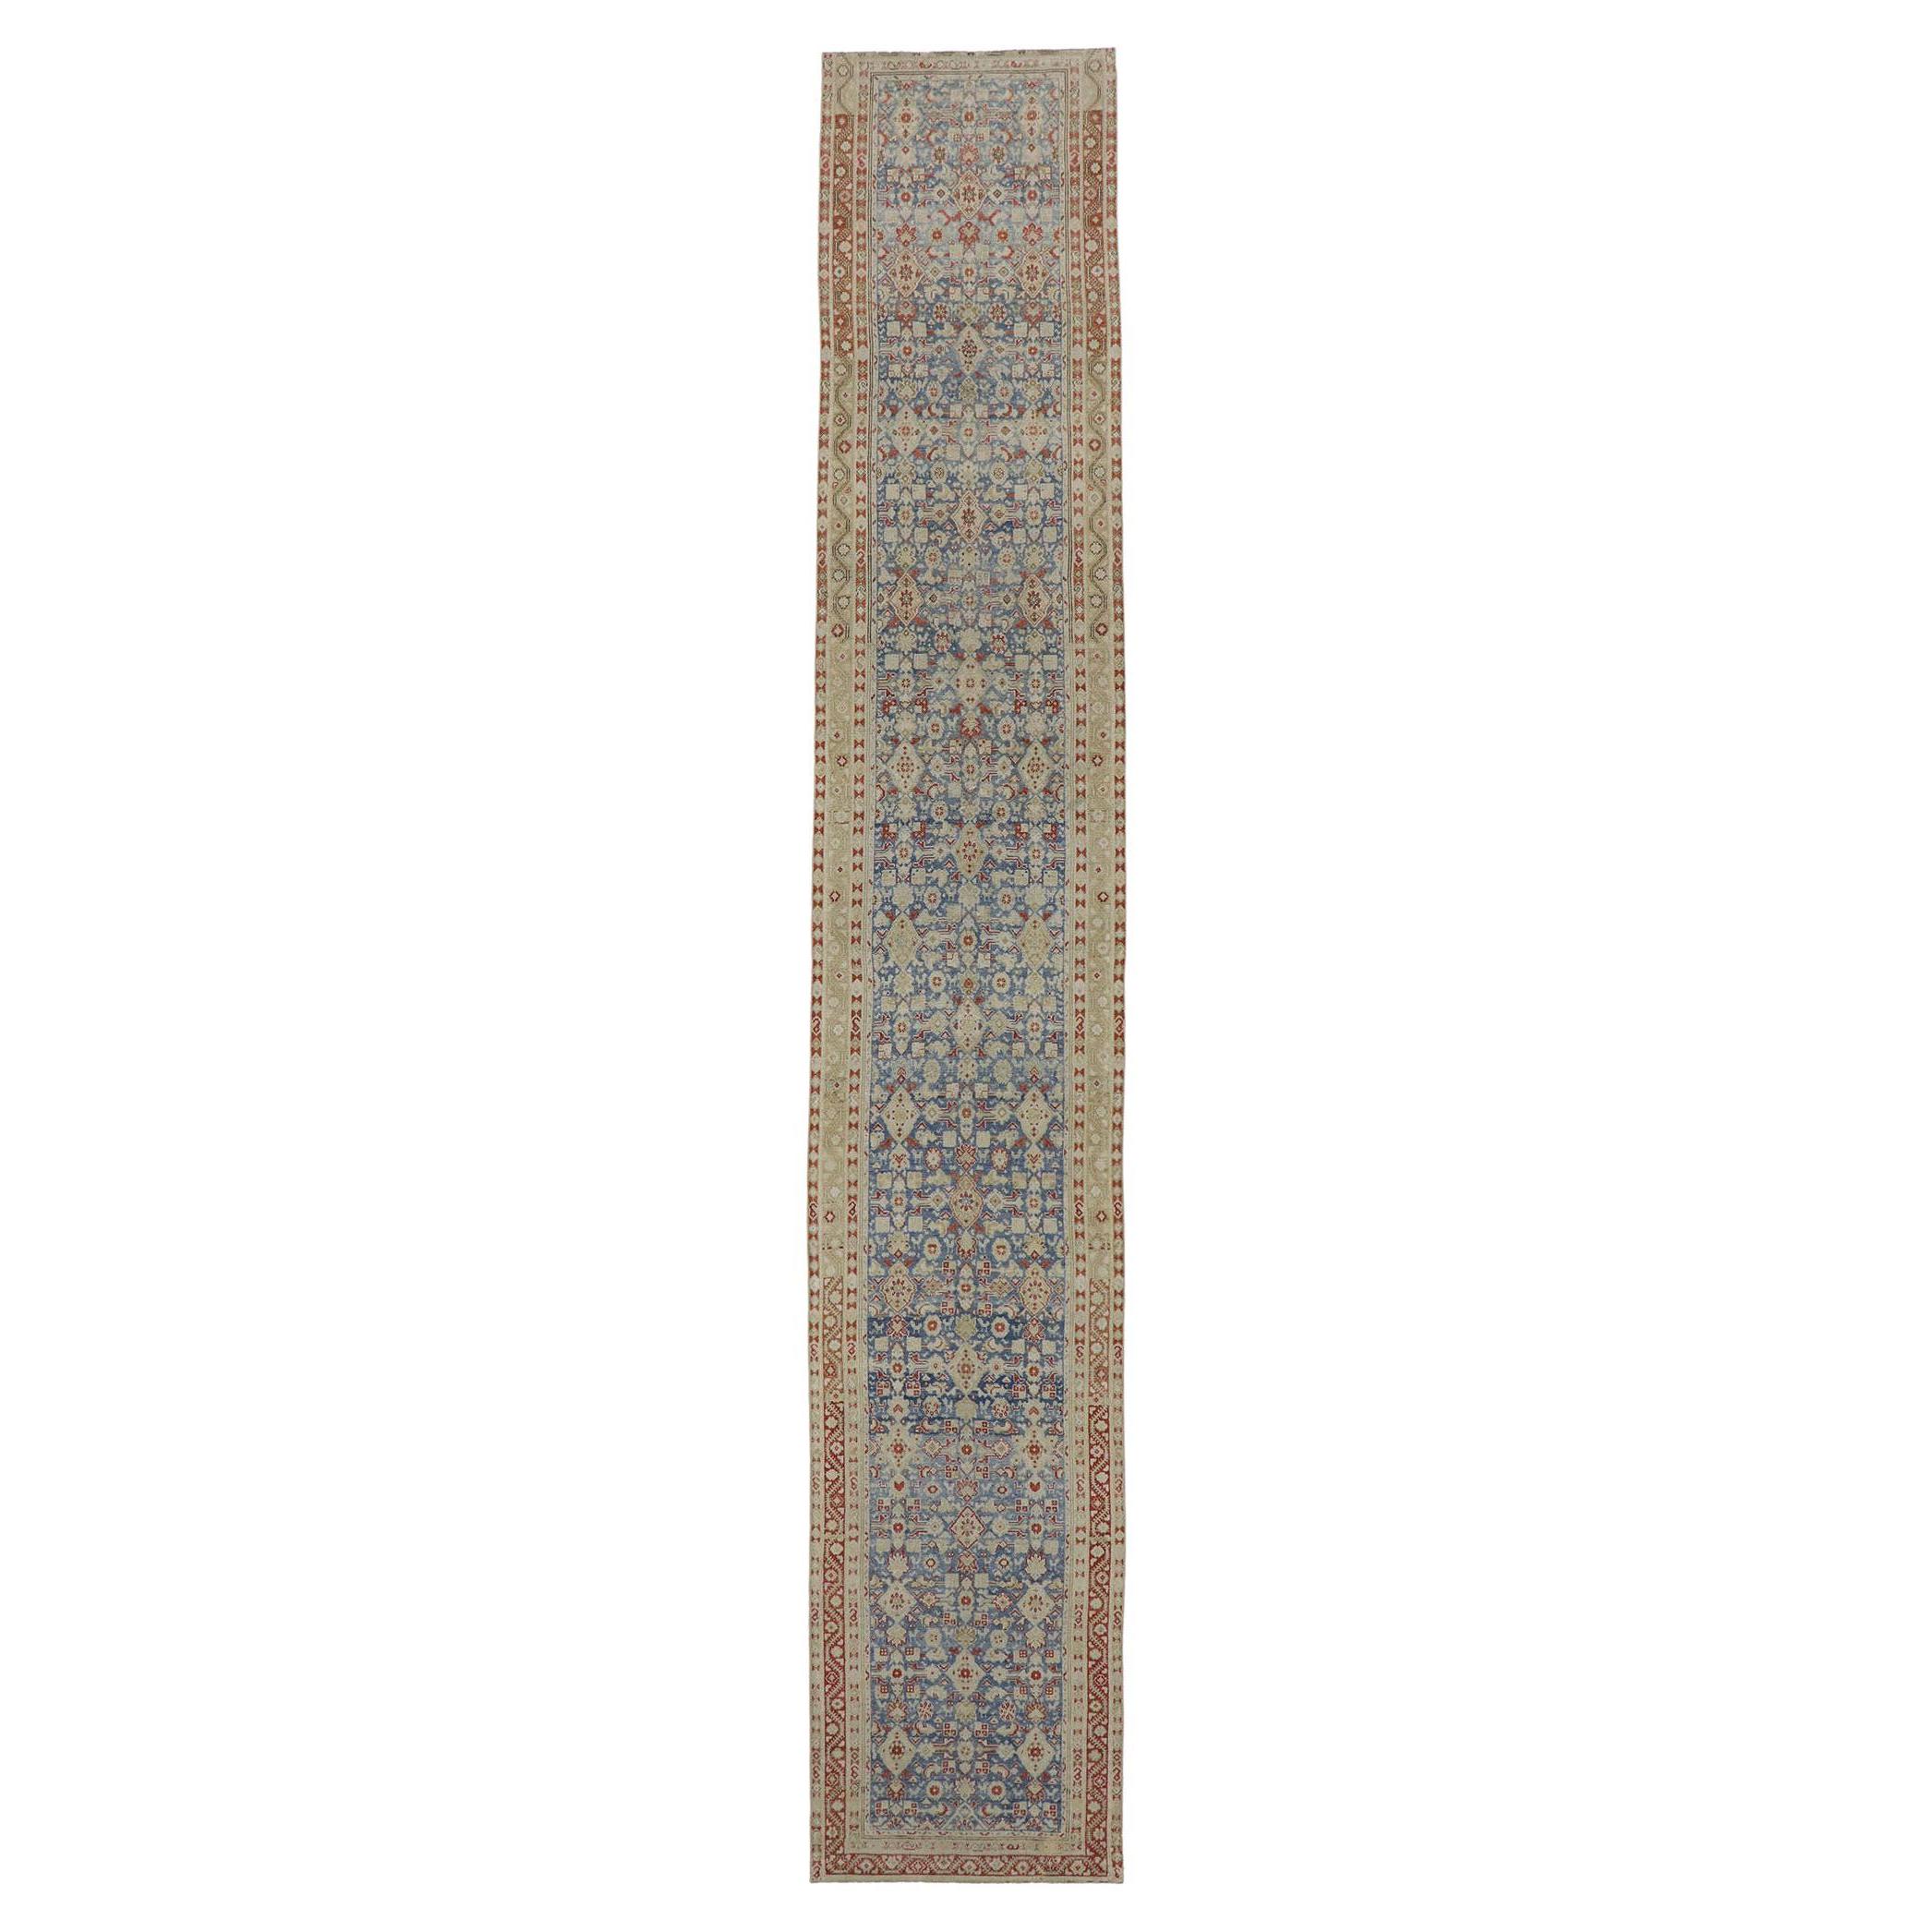 Distressed Antique Persian Malayer Runner with Relaxed Federal Style